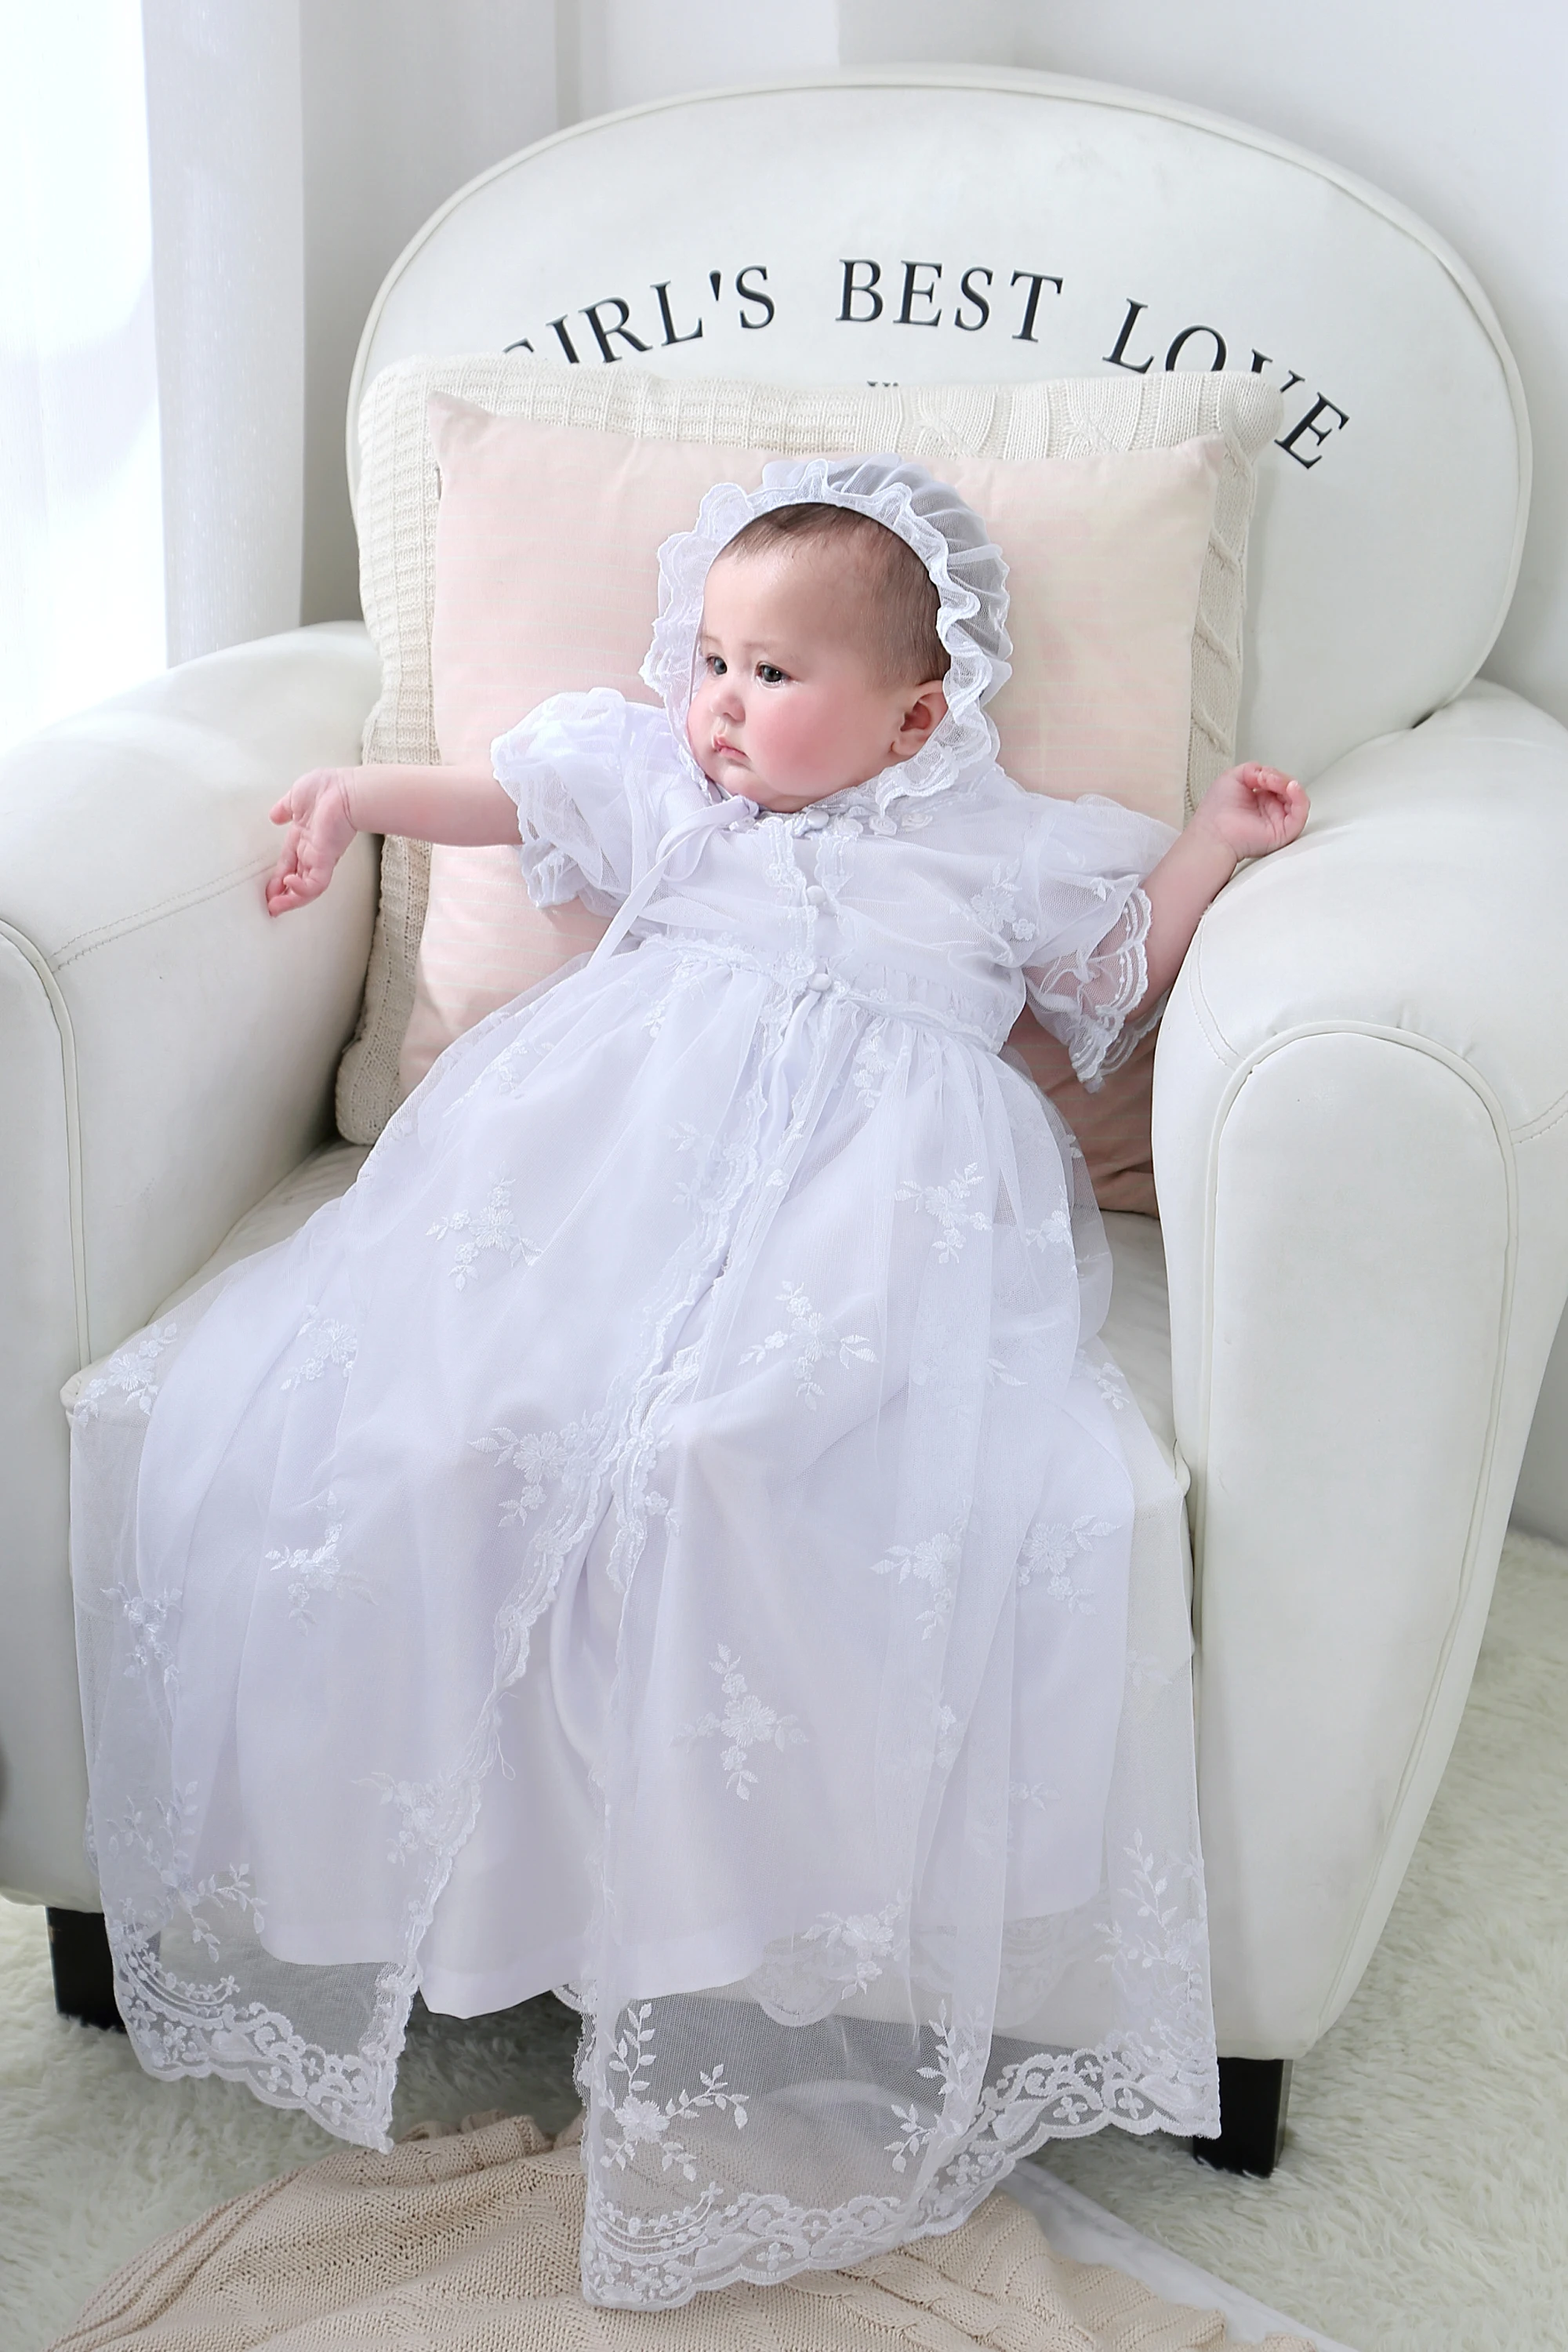 

Nimble Newborns Clothes Baby Girl Dress Three Pieces White Lace Embroidered Baptismal Floor-Length Christening Gowns